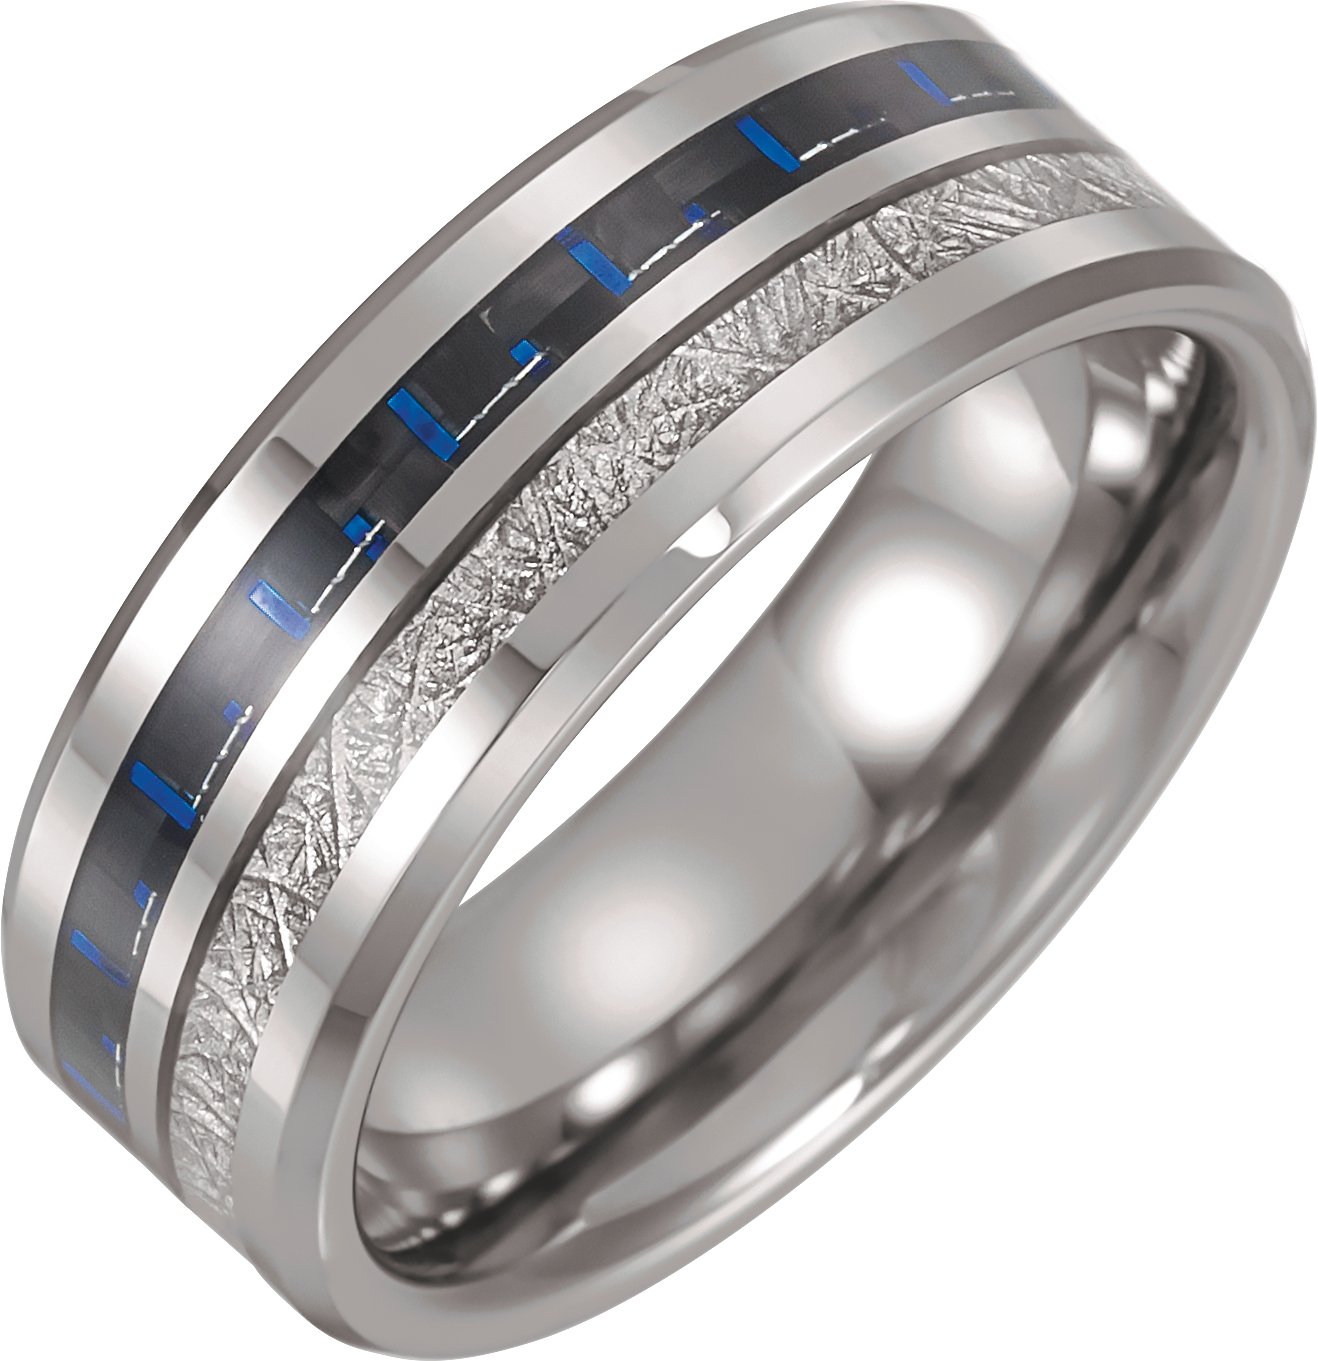 Tungsten 8 mm Band with Imitation Meteorite and Carbon Fiber Inlay Size 9 